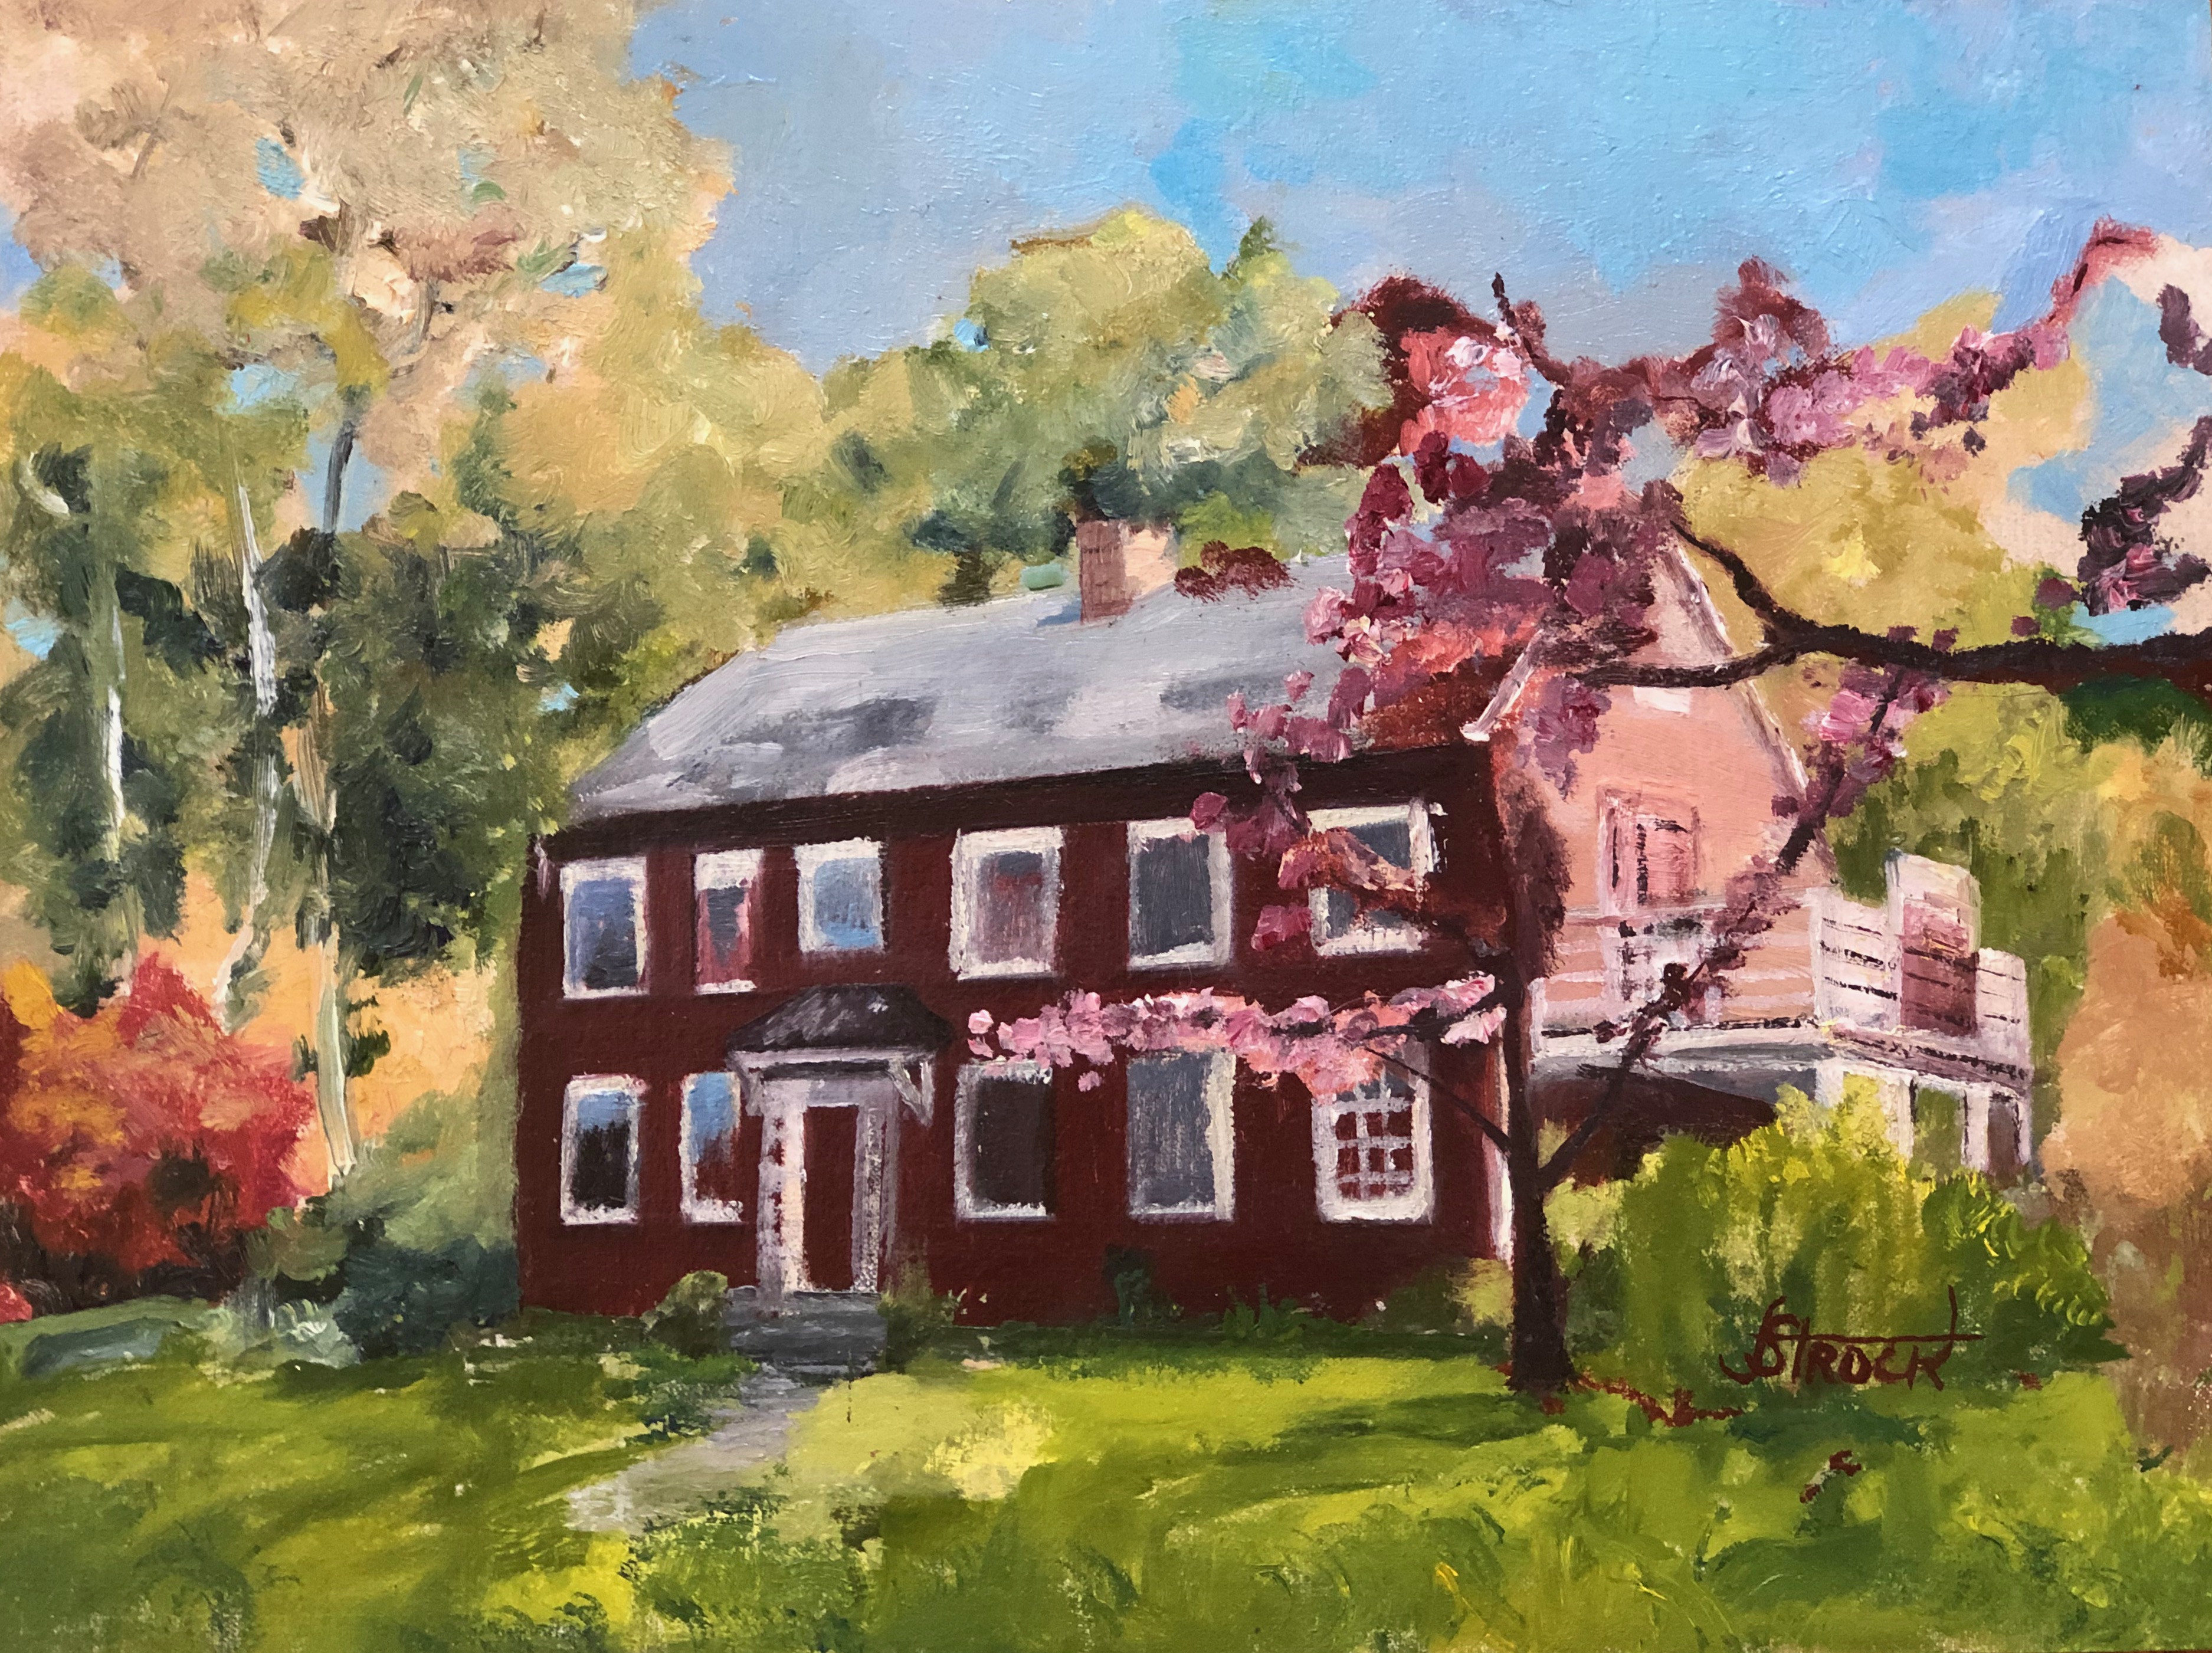 Memories of Bronxville, 9 x 12 inches, oil on birch wood panel